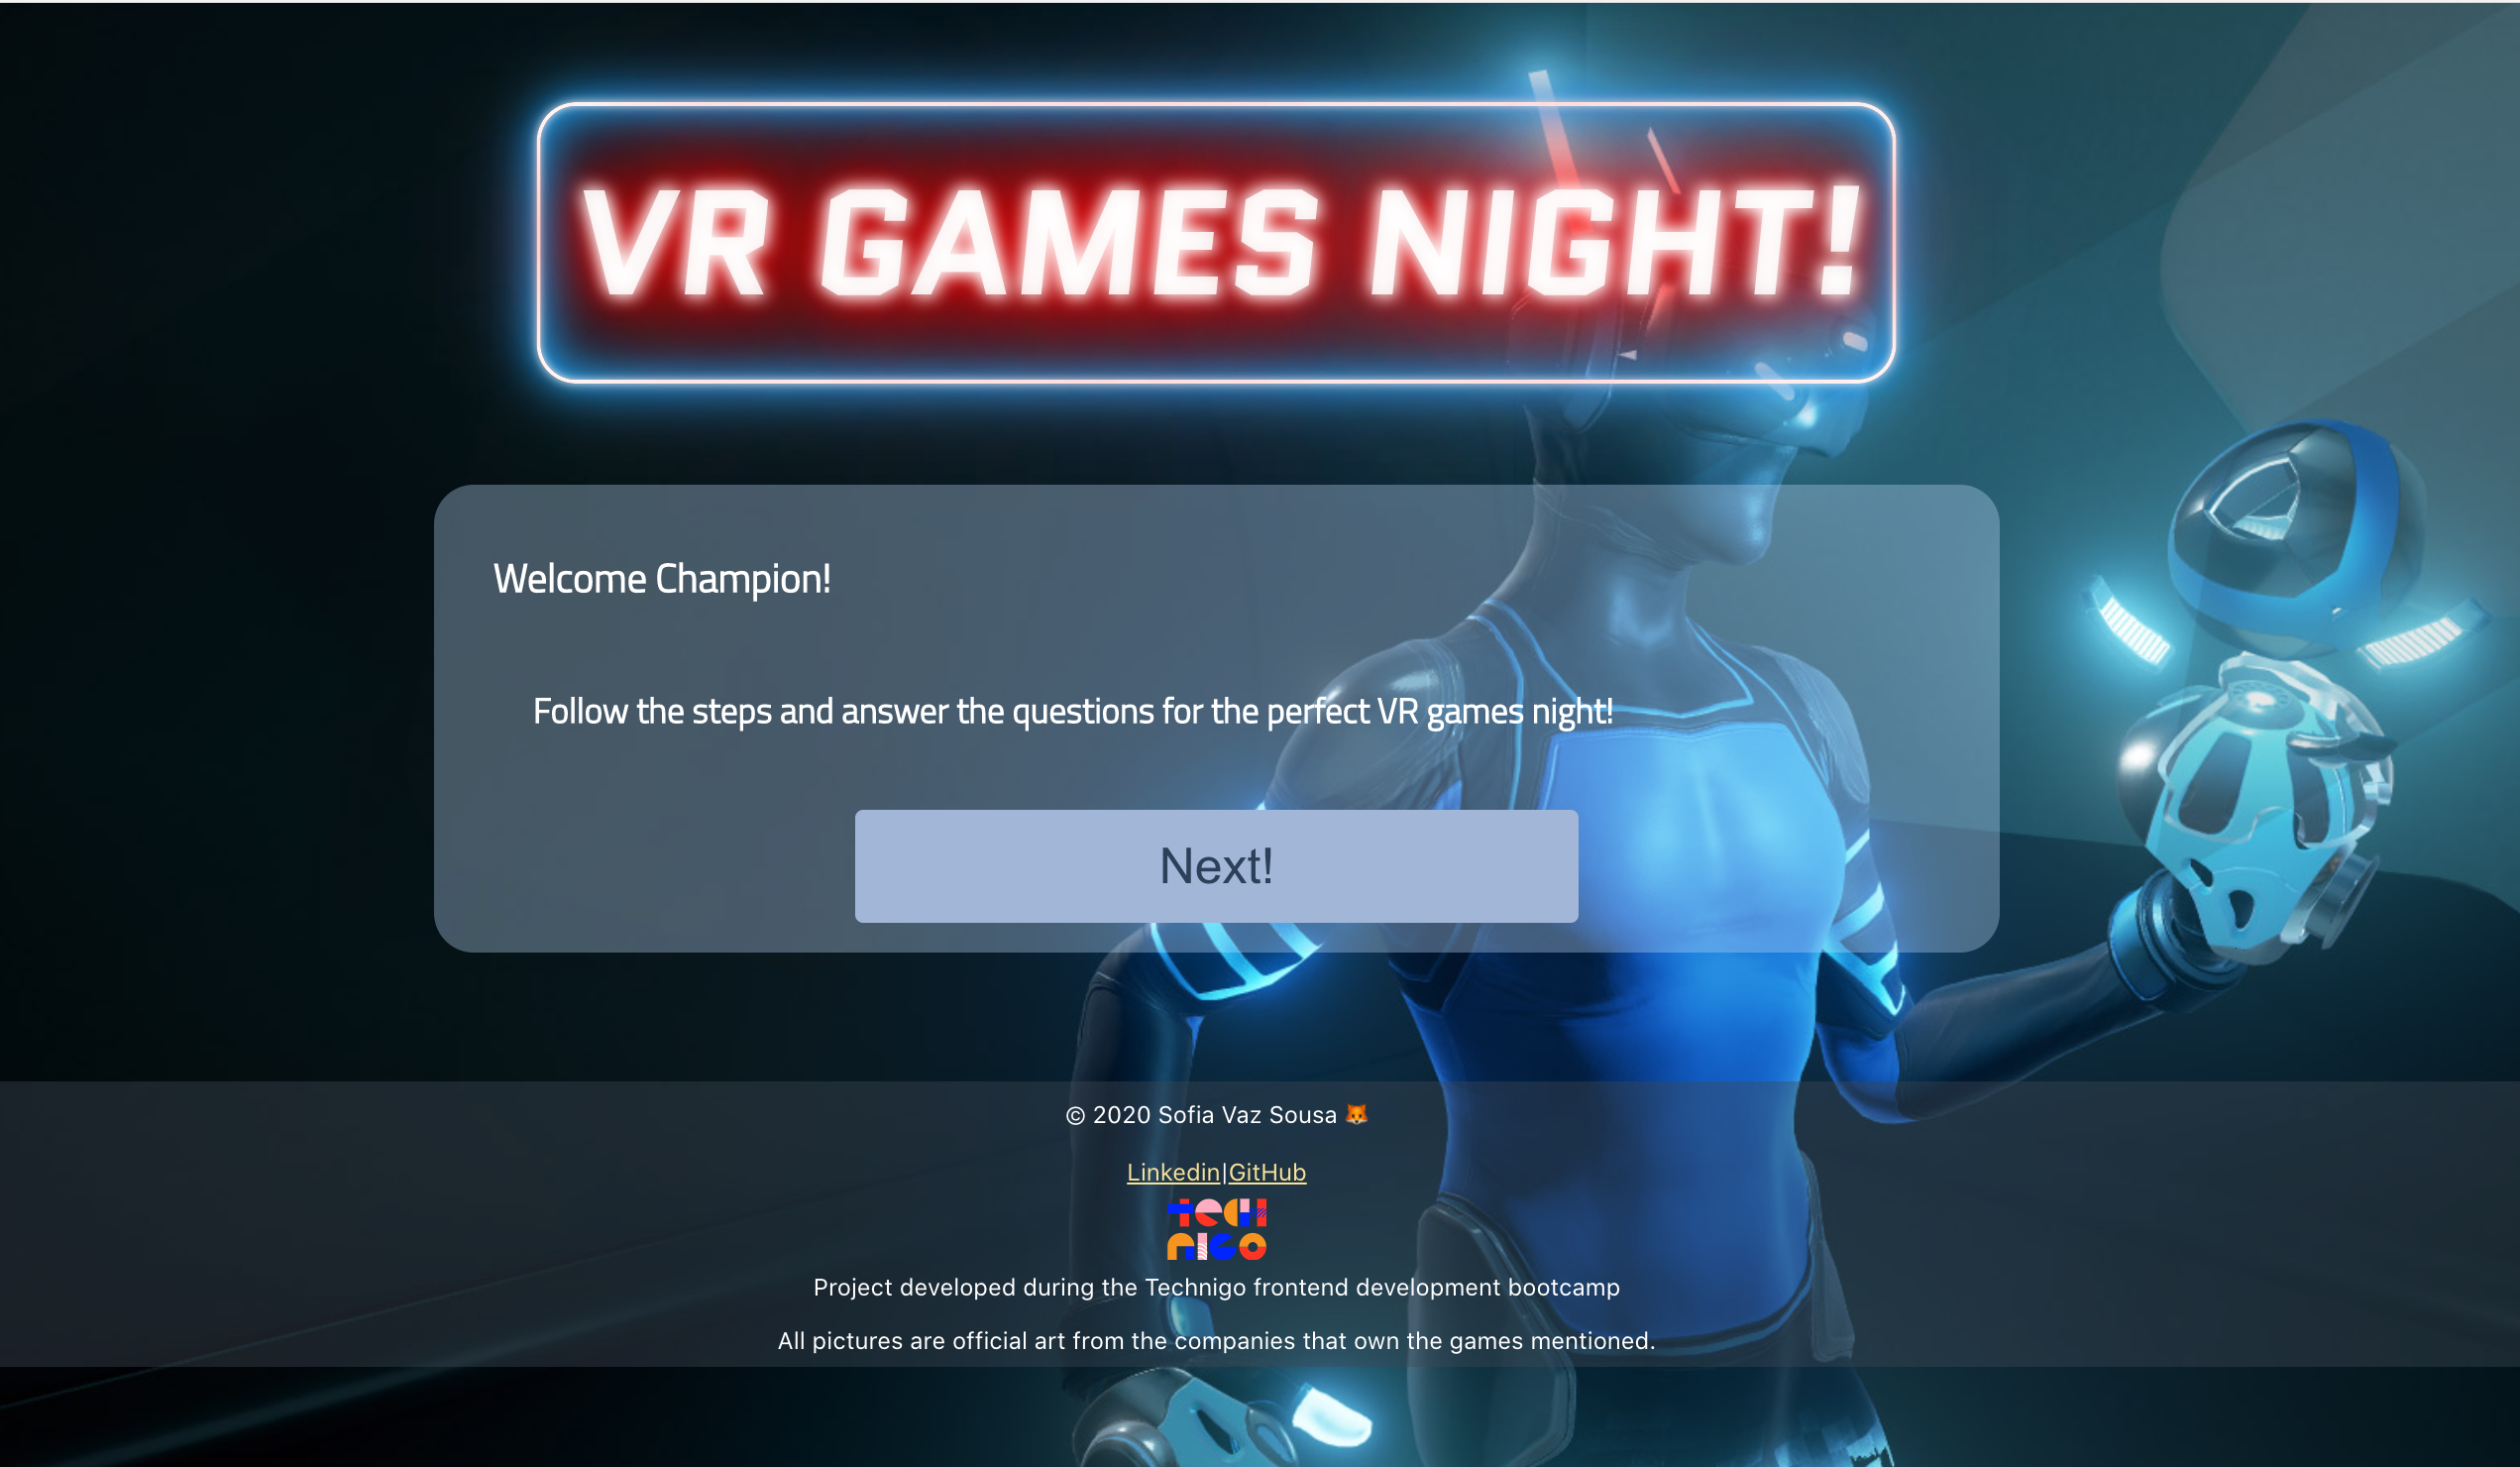 vr games night site front page image